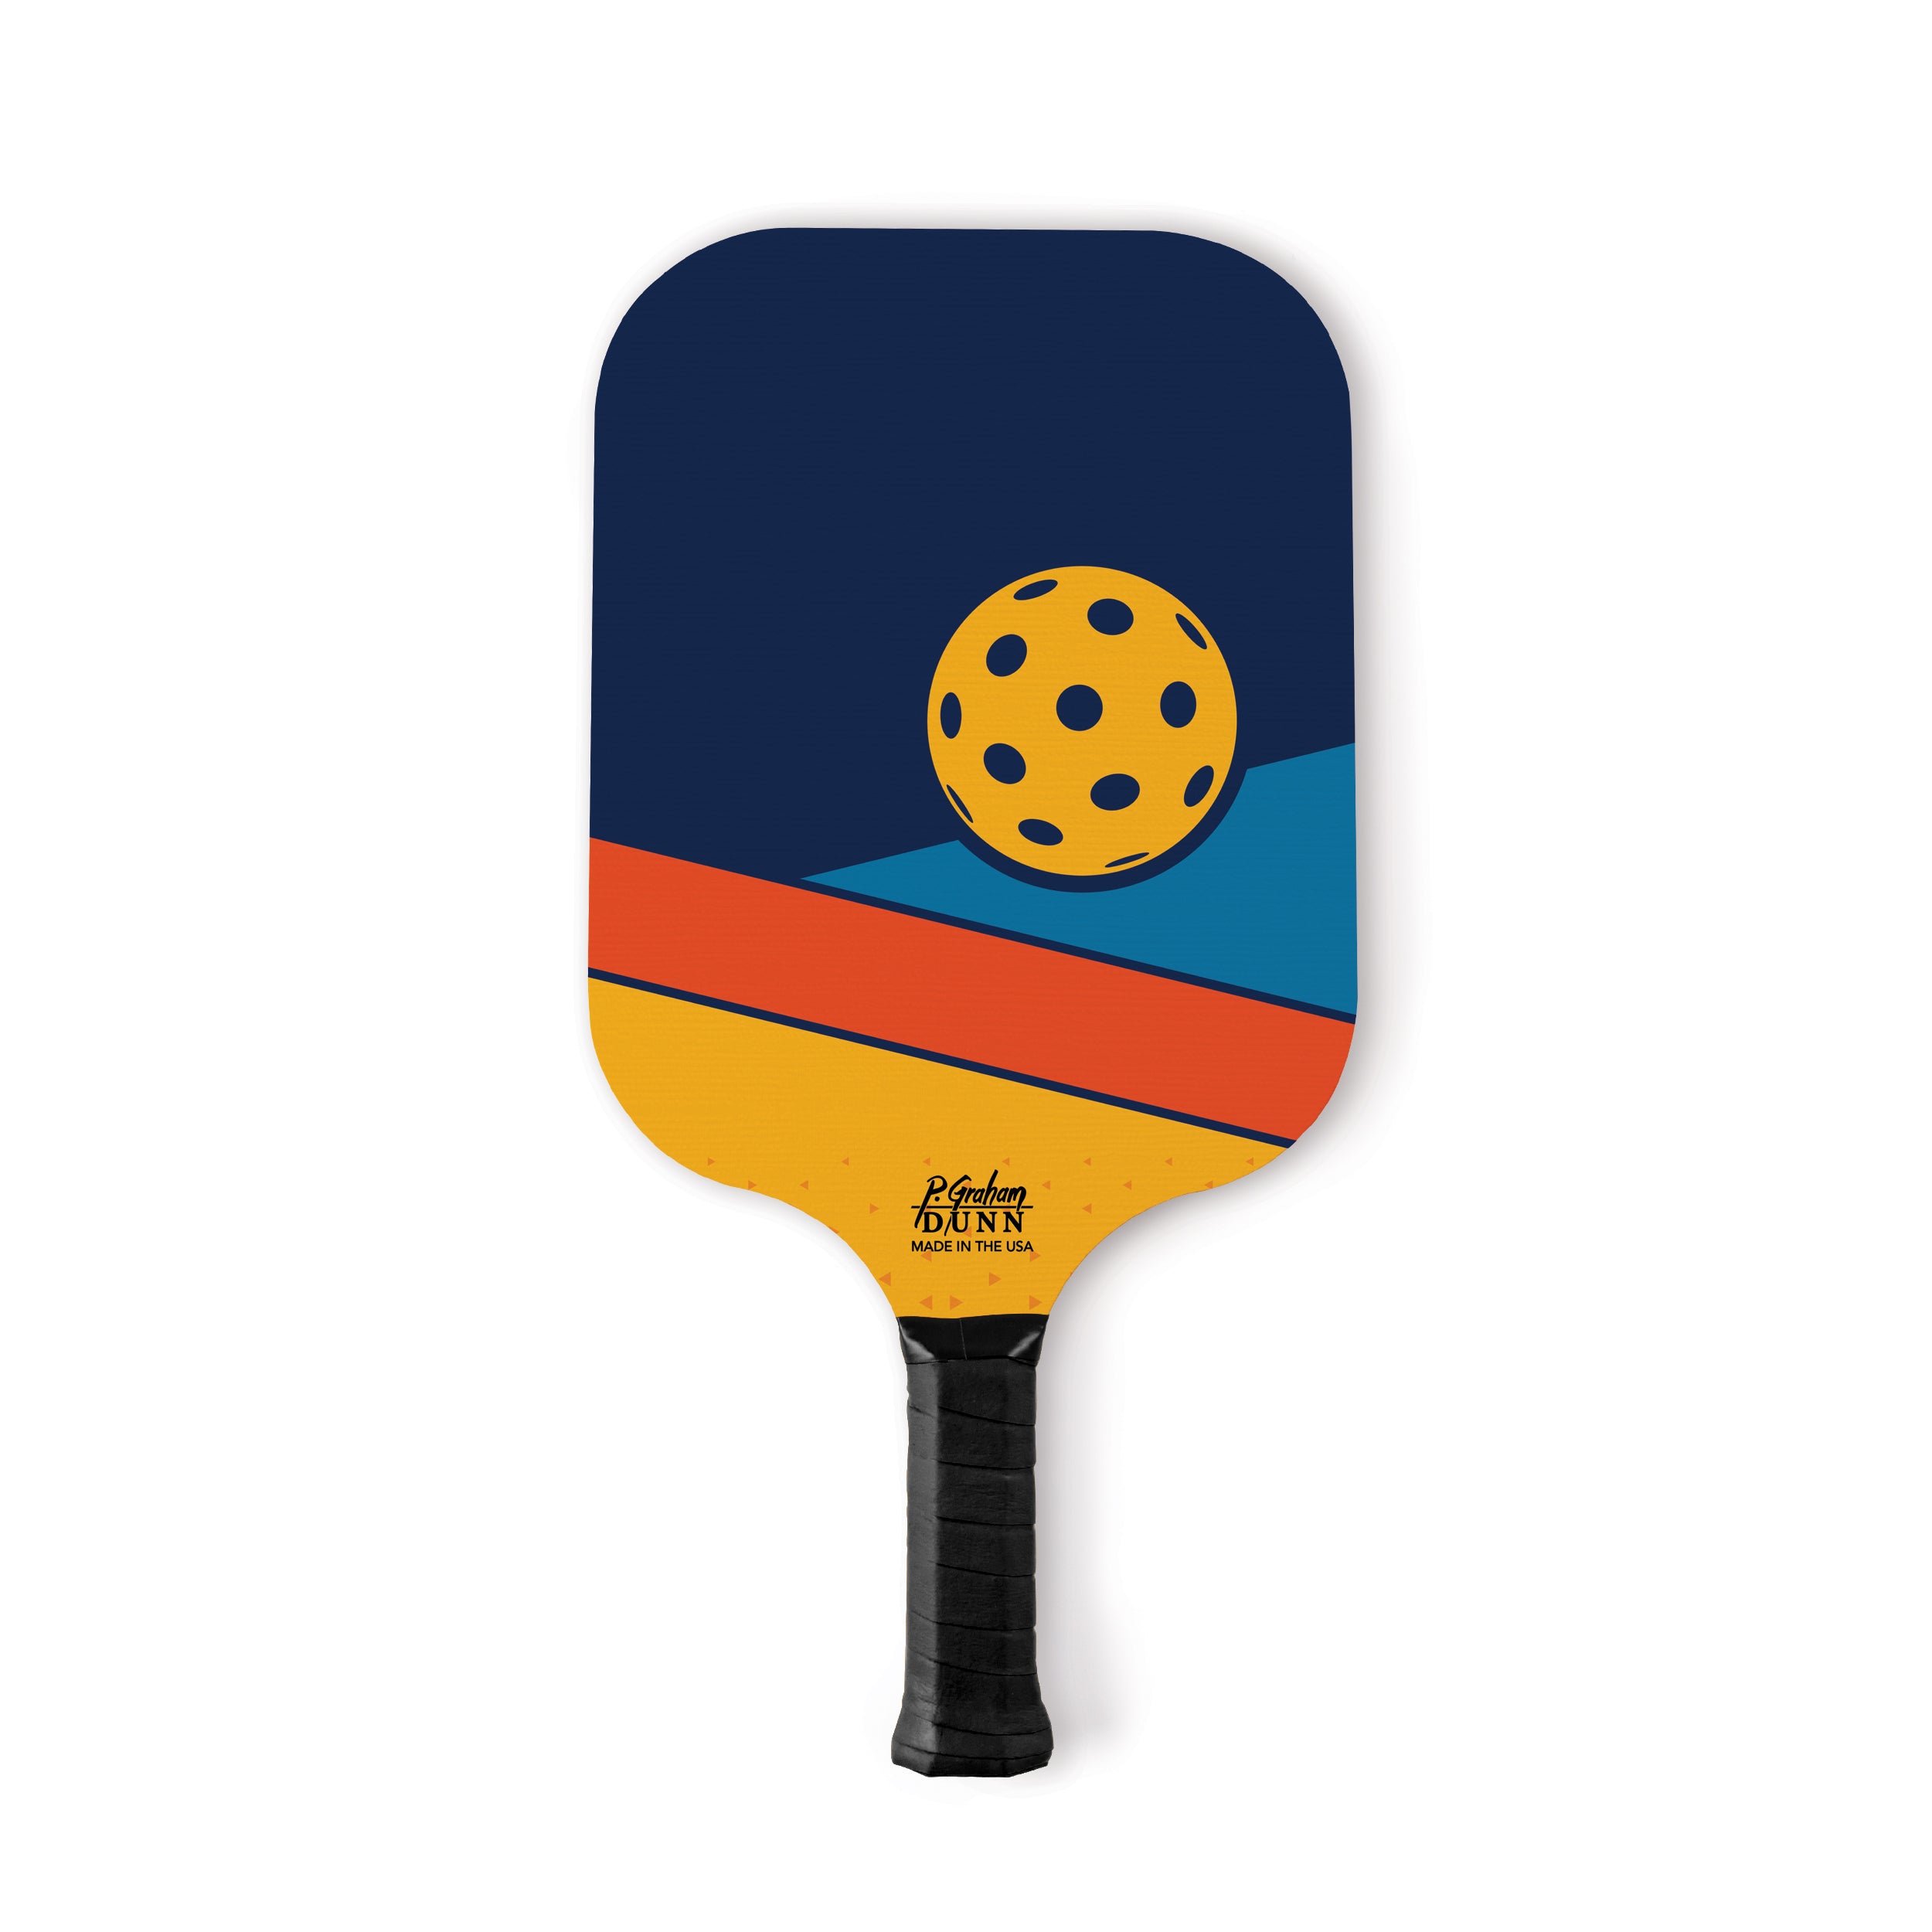 Pickleball Star Dill With It Pickleball Paddle